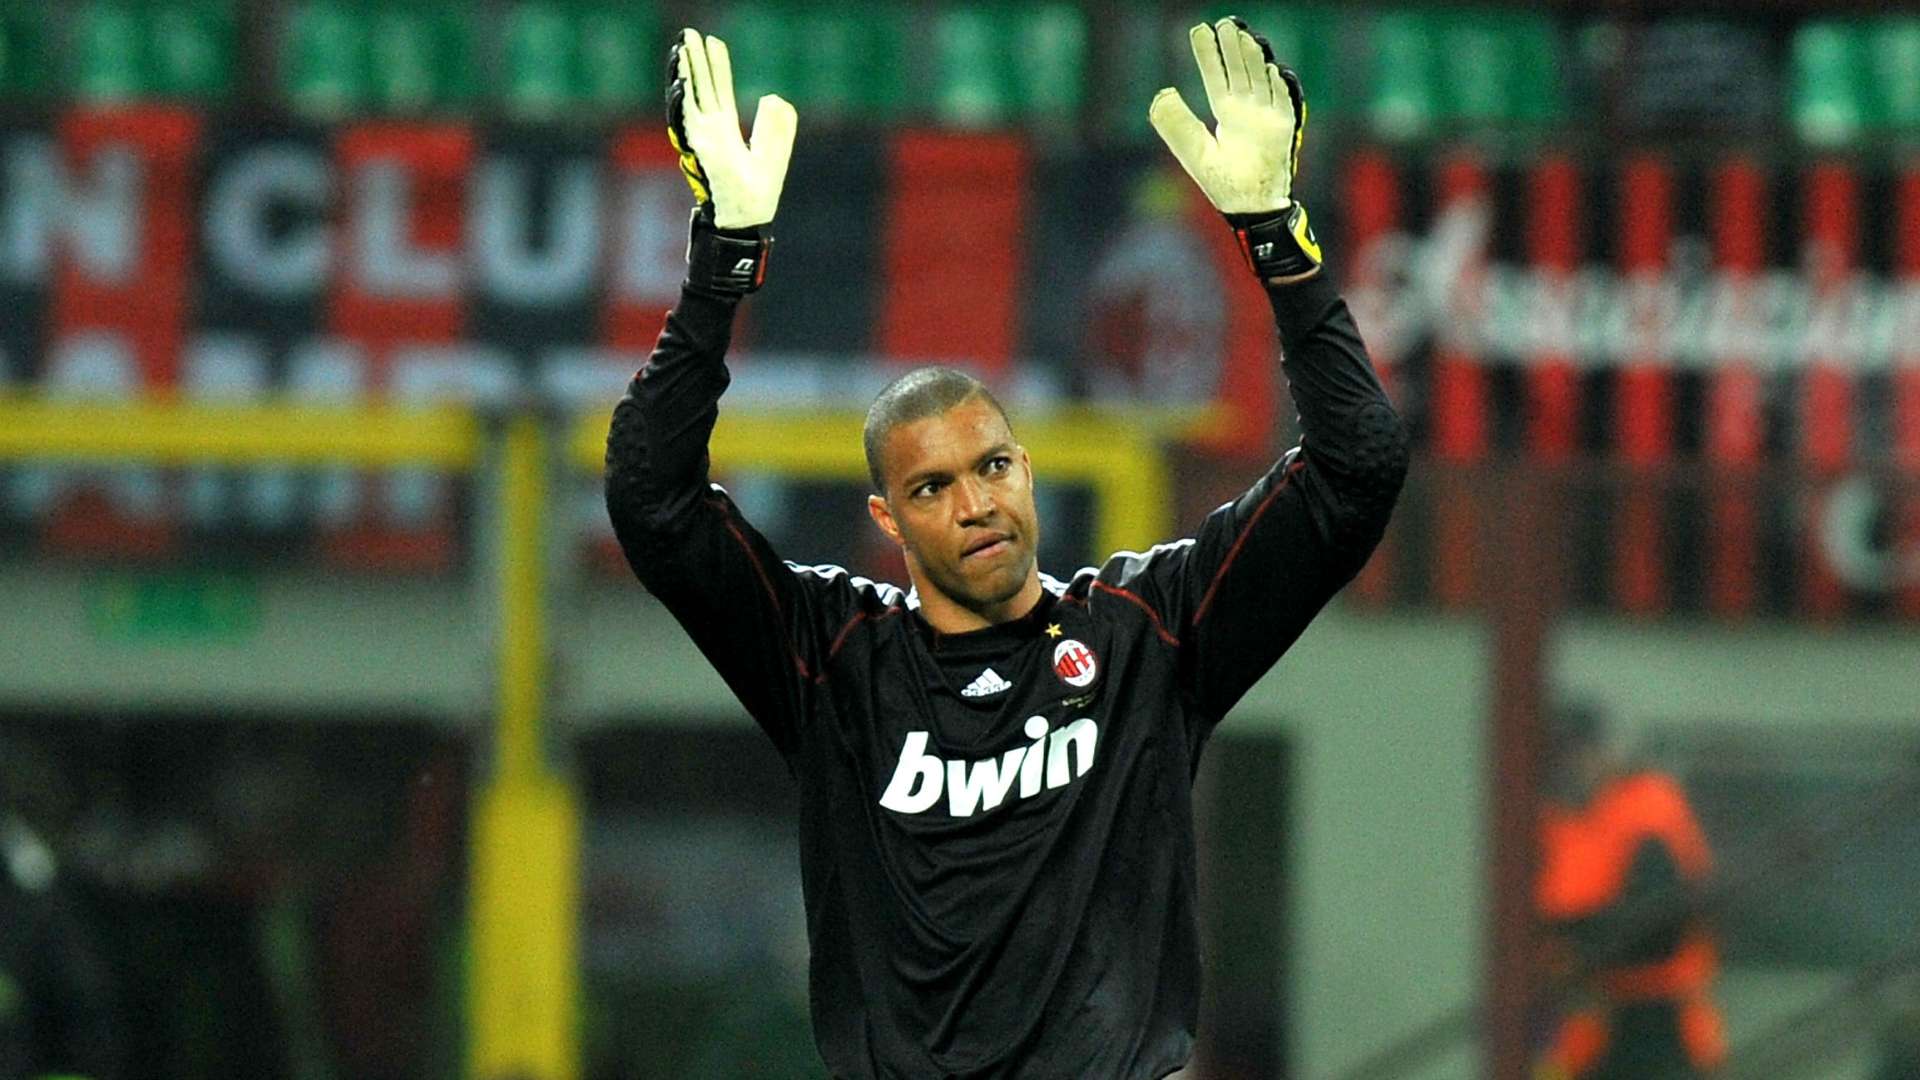 Nelson Dida Milan Serie A